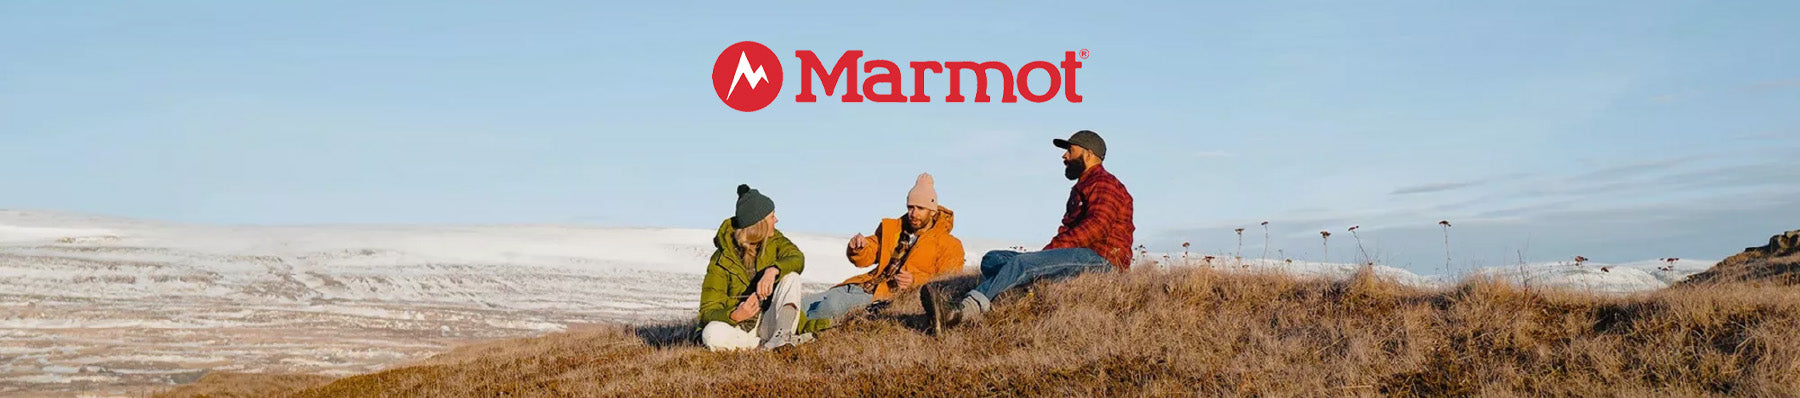 Marmot Banner Collection Image